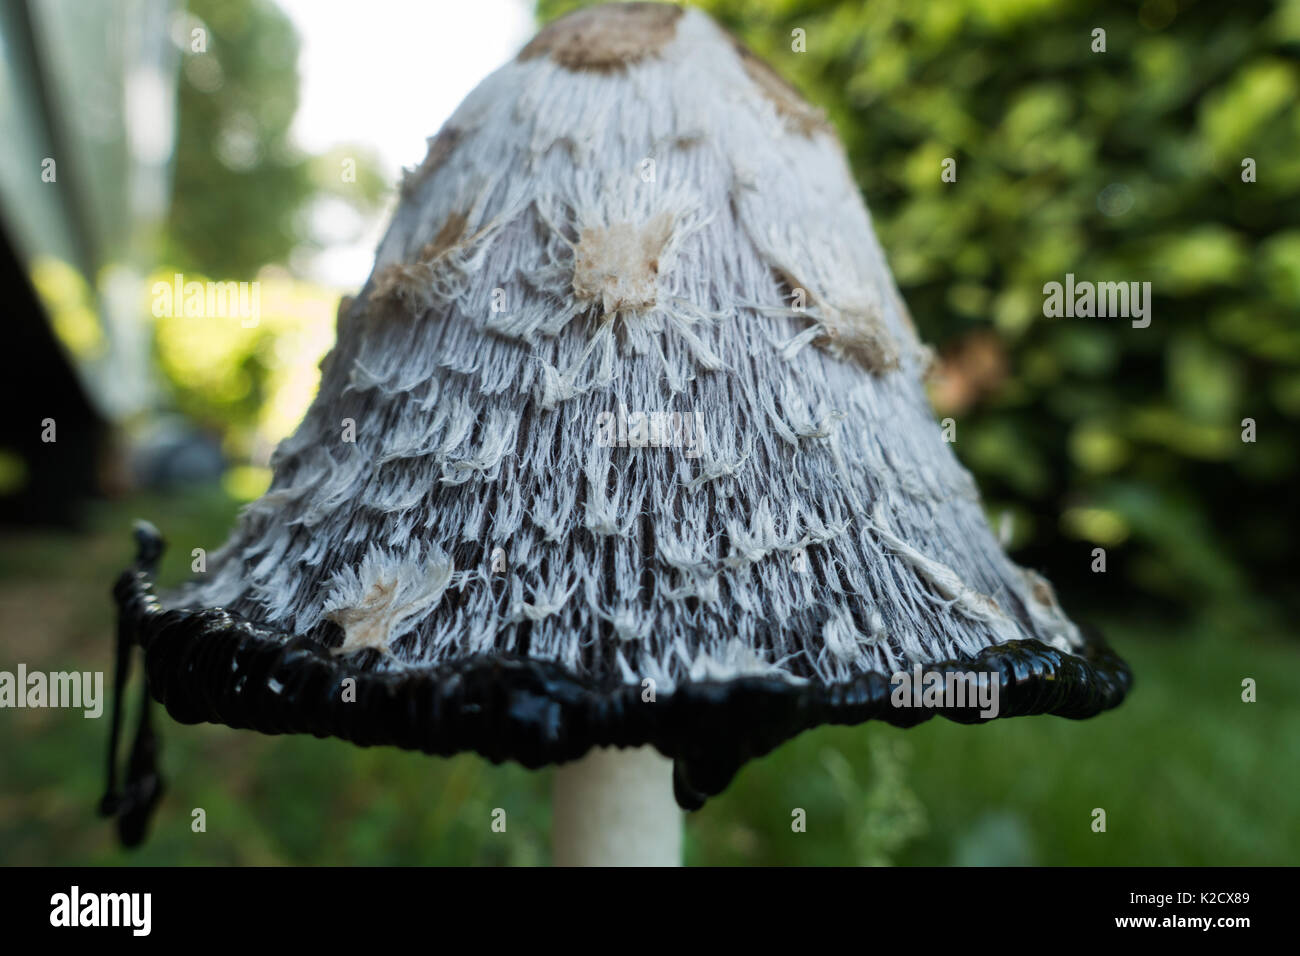 Shaggy Ink Cap, Lawyers Wig, Judges Wig, Coprinus comatus in it's decomposing stage showing the ink dripping from the cap as it deliquesces. Stock Photo